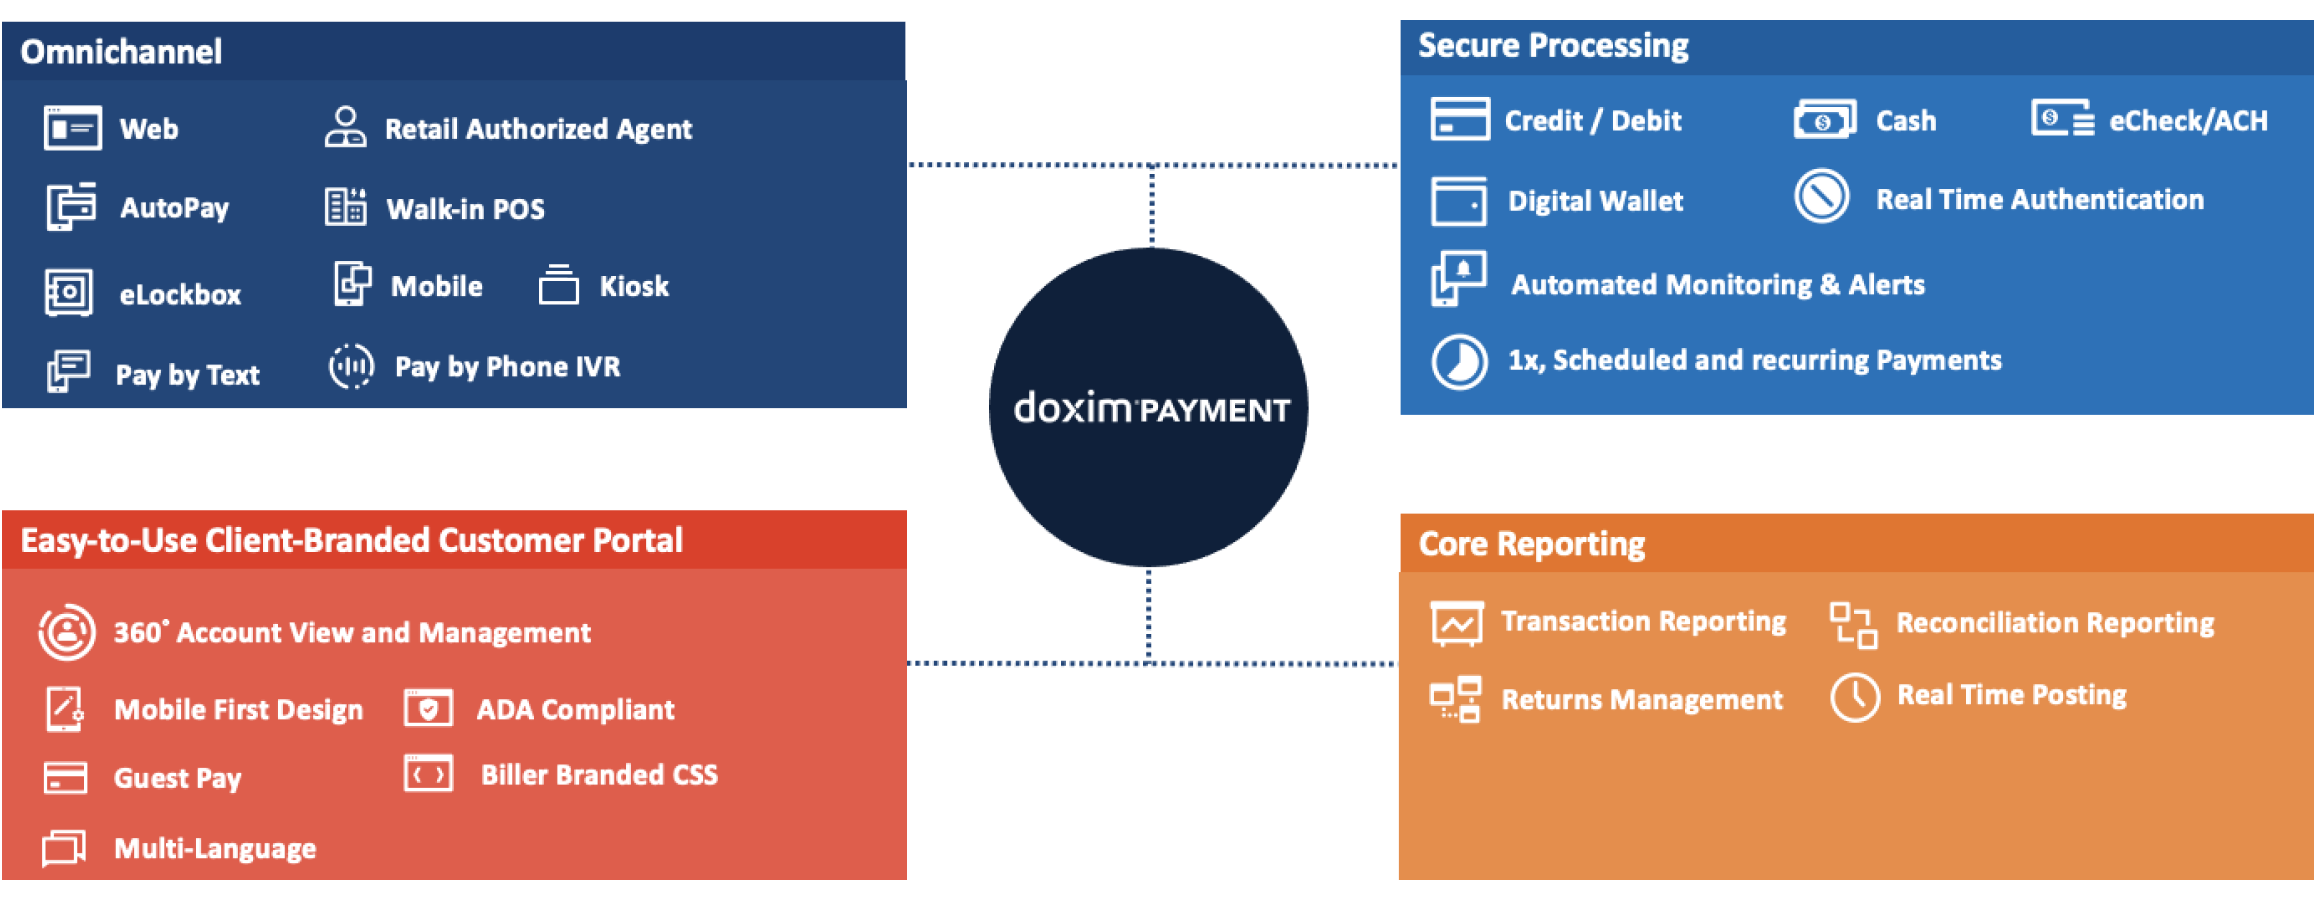 The Doxim Payment platform provides an all-in-one, frictionless experience for customers and staff. There are 4 key areas of functionality.  First, it is an omnichannel solution with a variety of options for engagement and payment. Customers can engage in-person at a kiosk, with an authorized agent, or at a walk-in POS. They can engage digitally using a desktop or mobile device, through eLockbox, or through the web. Customers set up auto pay, they can pay-by-text or pay by phone IVR.   Second, the solution provides clients with a biller-branded, easy-to-use web-based customer portal. This portal supports multi languages, is ADA compliant, has a mobile-first design, and supports both account management and guest pay.  Third, the solution supports secure payment processing. Payments can be made by credit or debit, digital wallet, cash, eCheck or ACH. Customers can make a 1-time payment or schedule recurring payments. The solution also provides real-time authentication and automated monitoring and alerts.  Lastly, standard or core reporting is provided to support transaction reporting, reconciliation reporting, real-time posting and returns management. 